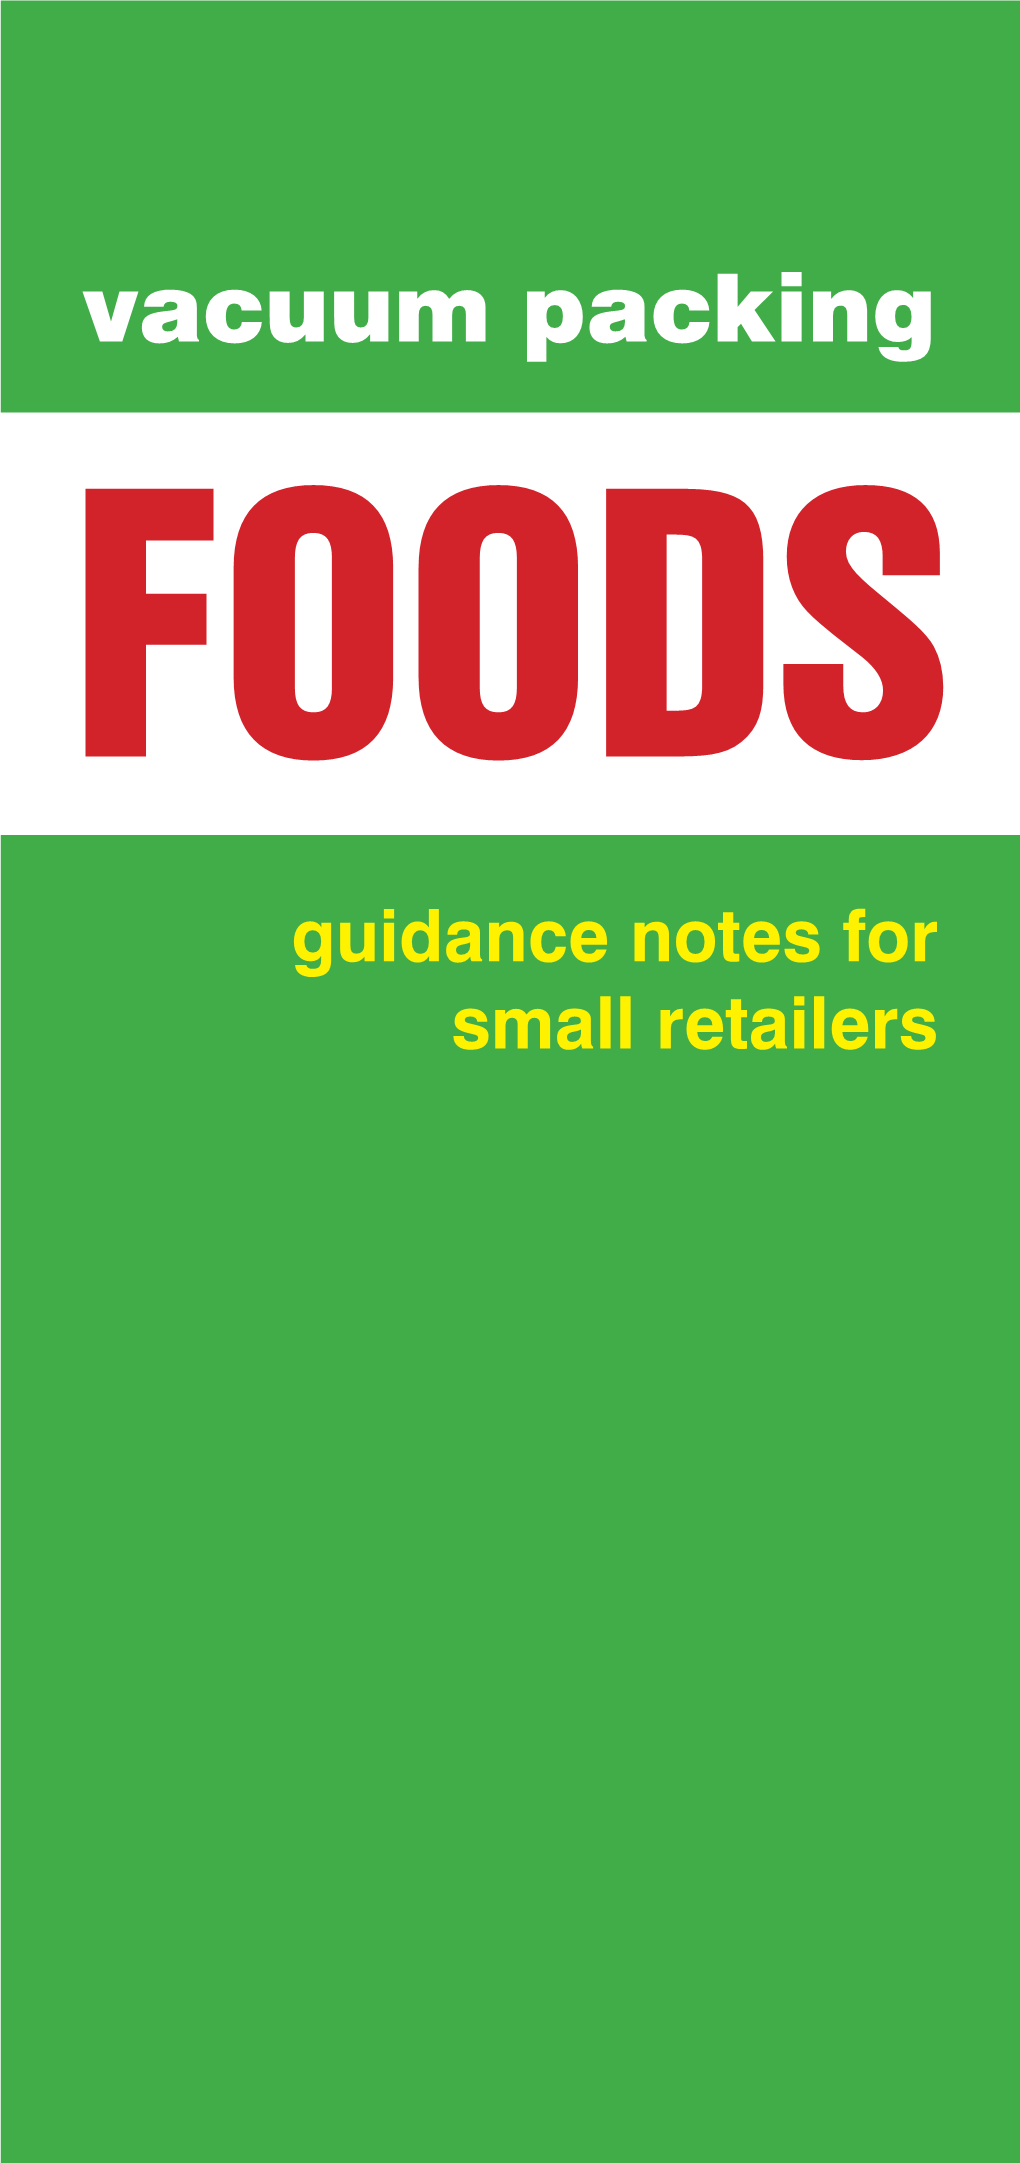 Vacuum Packing Foods Guidance Notes for Small Retailers Leaflet Produced by Torbay Council